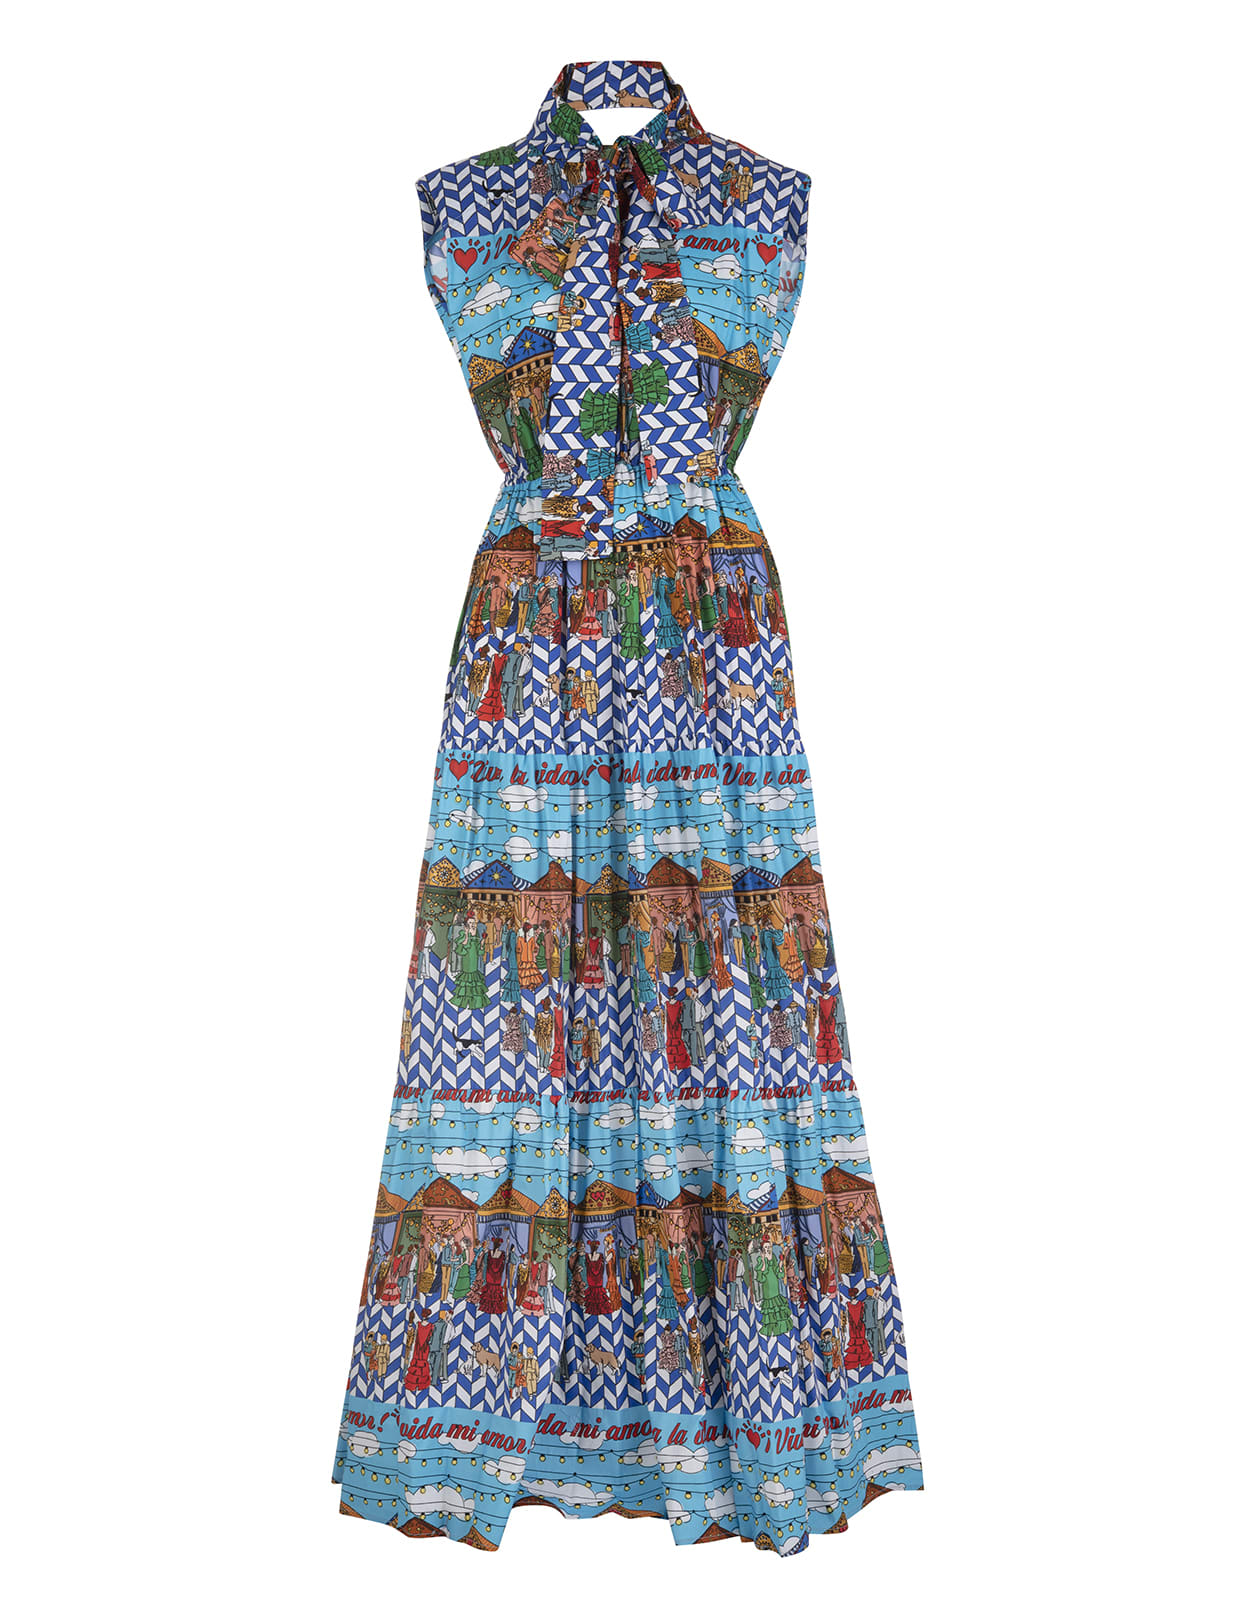 ALESSANDRO ENRIQUEZ LONG SLEEVELESS DRESS WITH ALL-OVER POP GRAPHIC PRINT